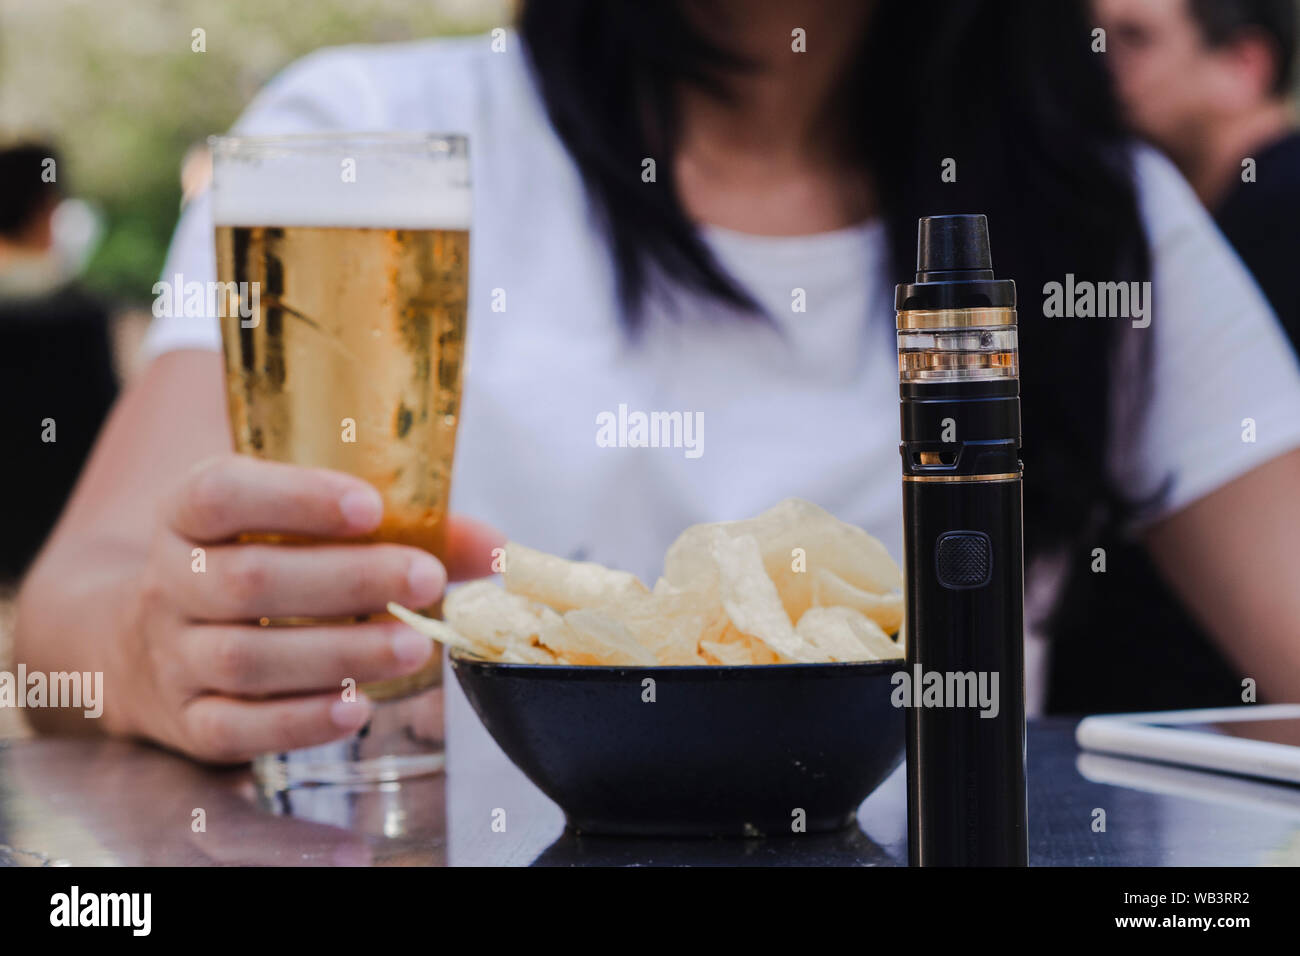 Woman drinking a beer on a terrace with electronic cigarette on the table and french fries Stock Photo